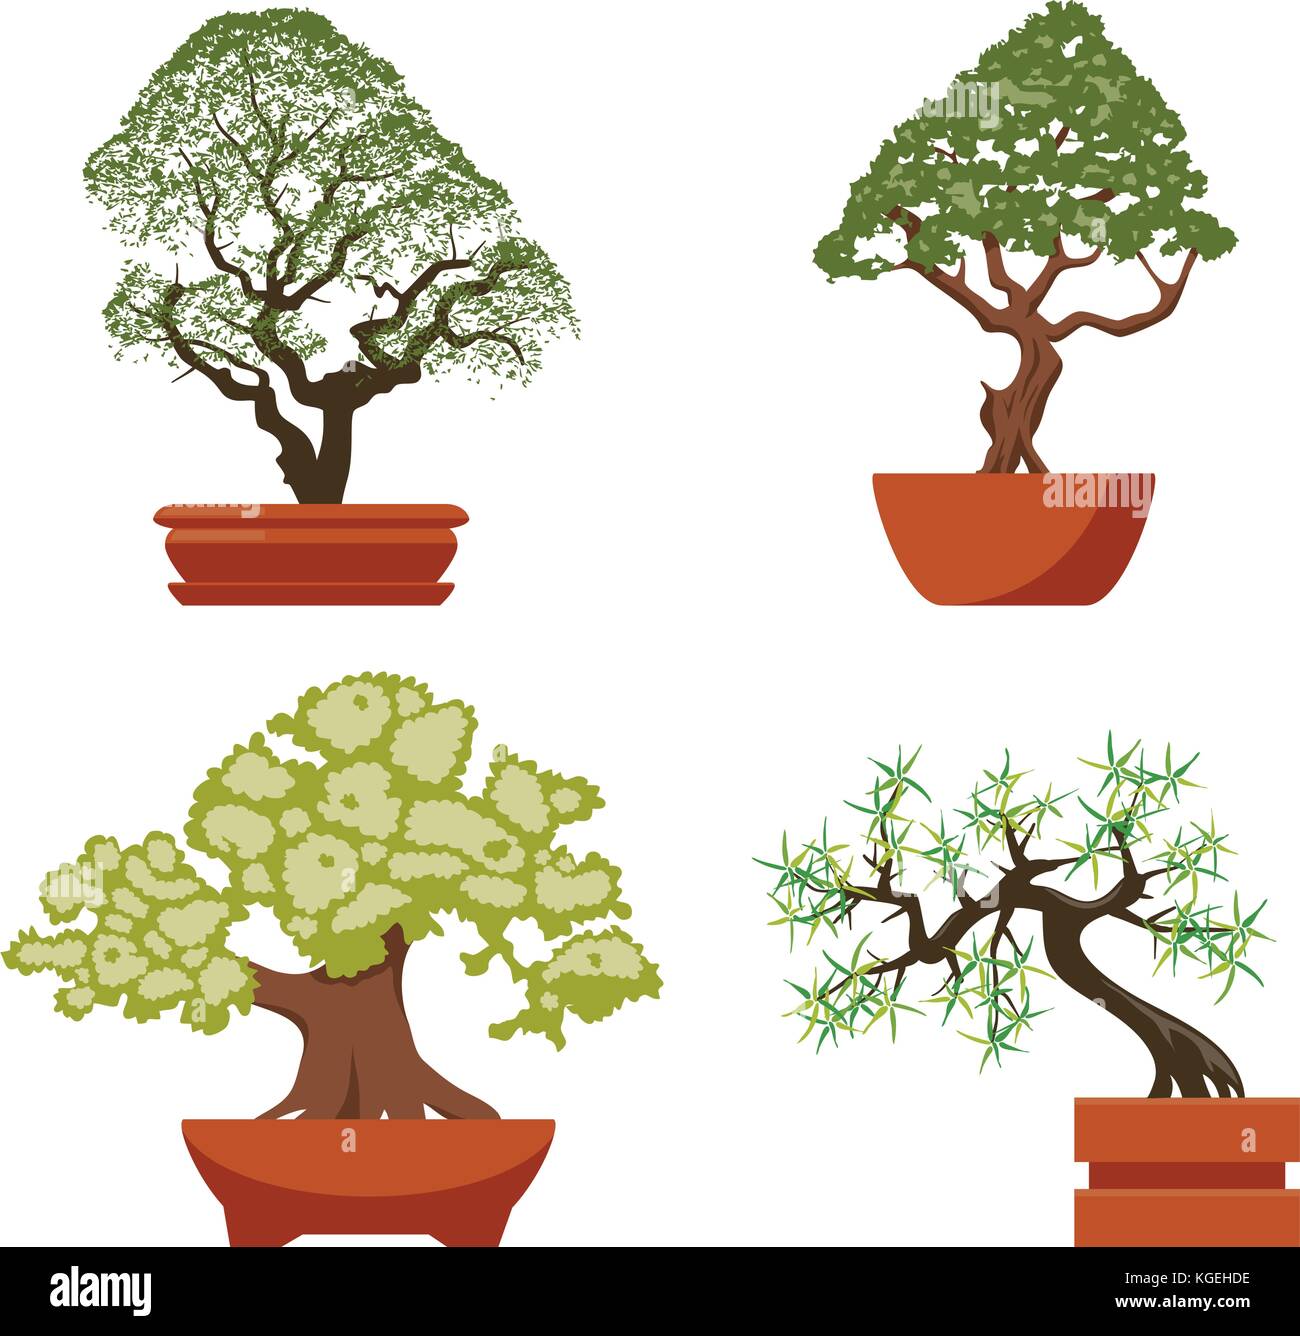 vector set of colorful bonsai trees in pots, isolated on white background. chinese bonsai art symbols, flat design Stock Vector